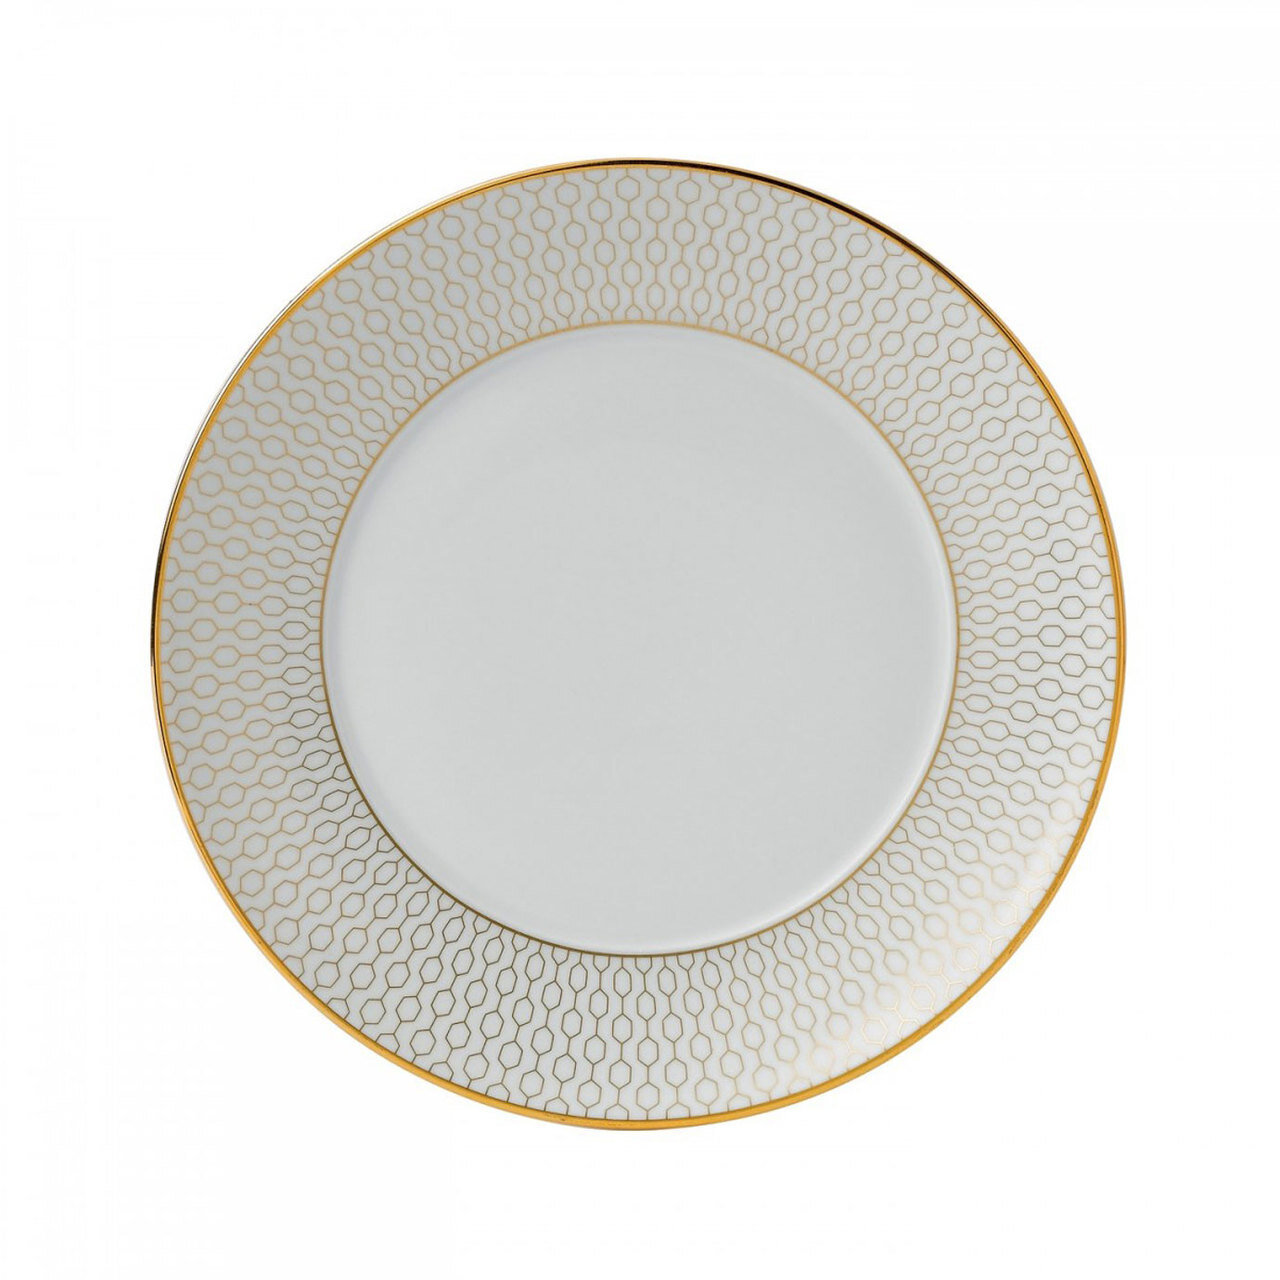 Wedgwood Arris Bread and Butter Plate 6.7 Inch